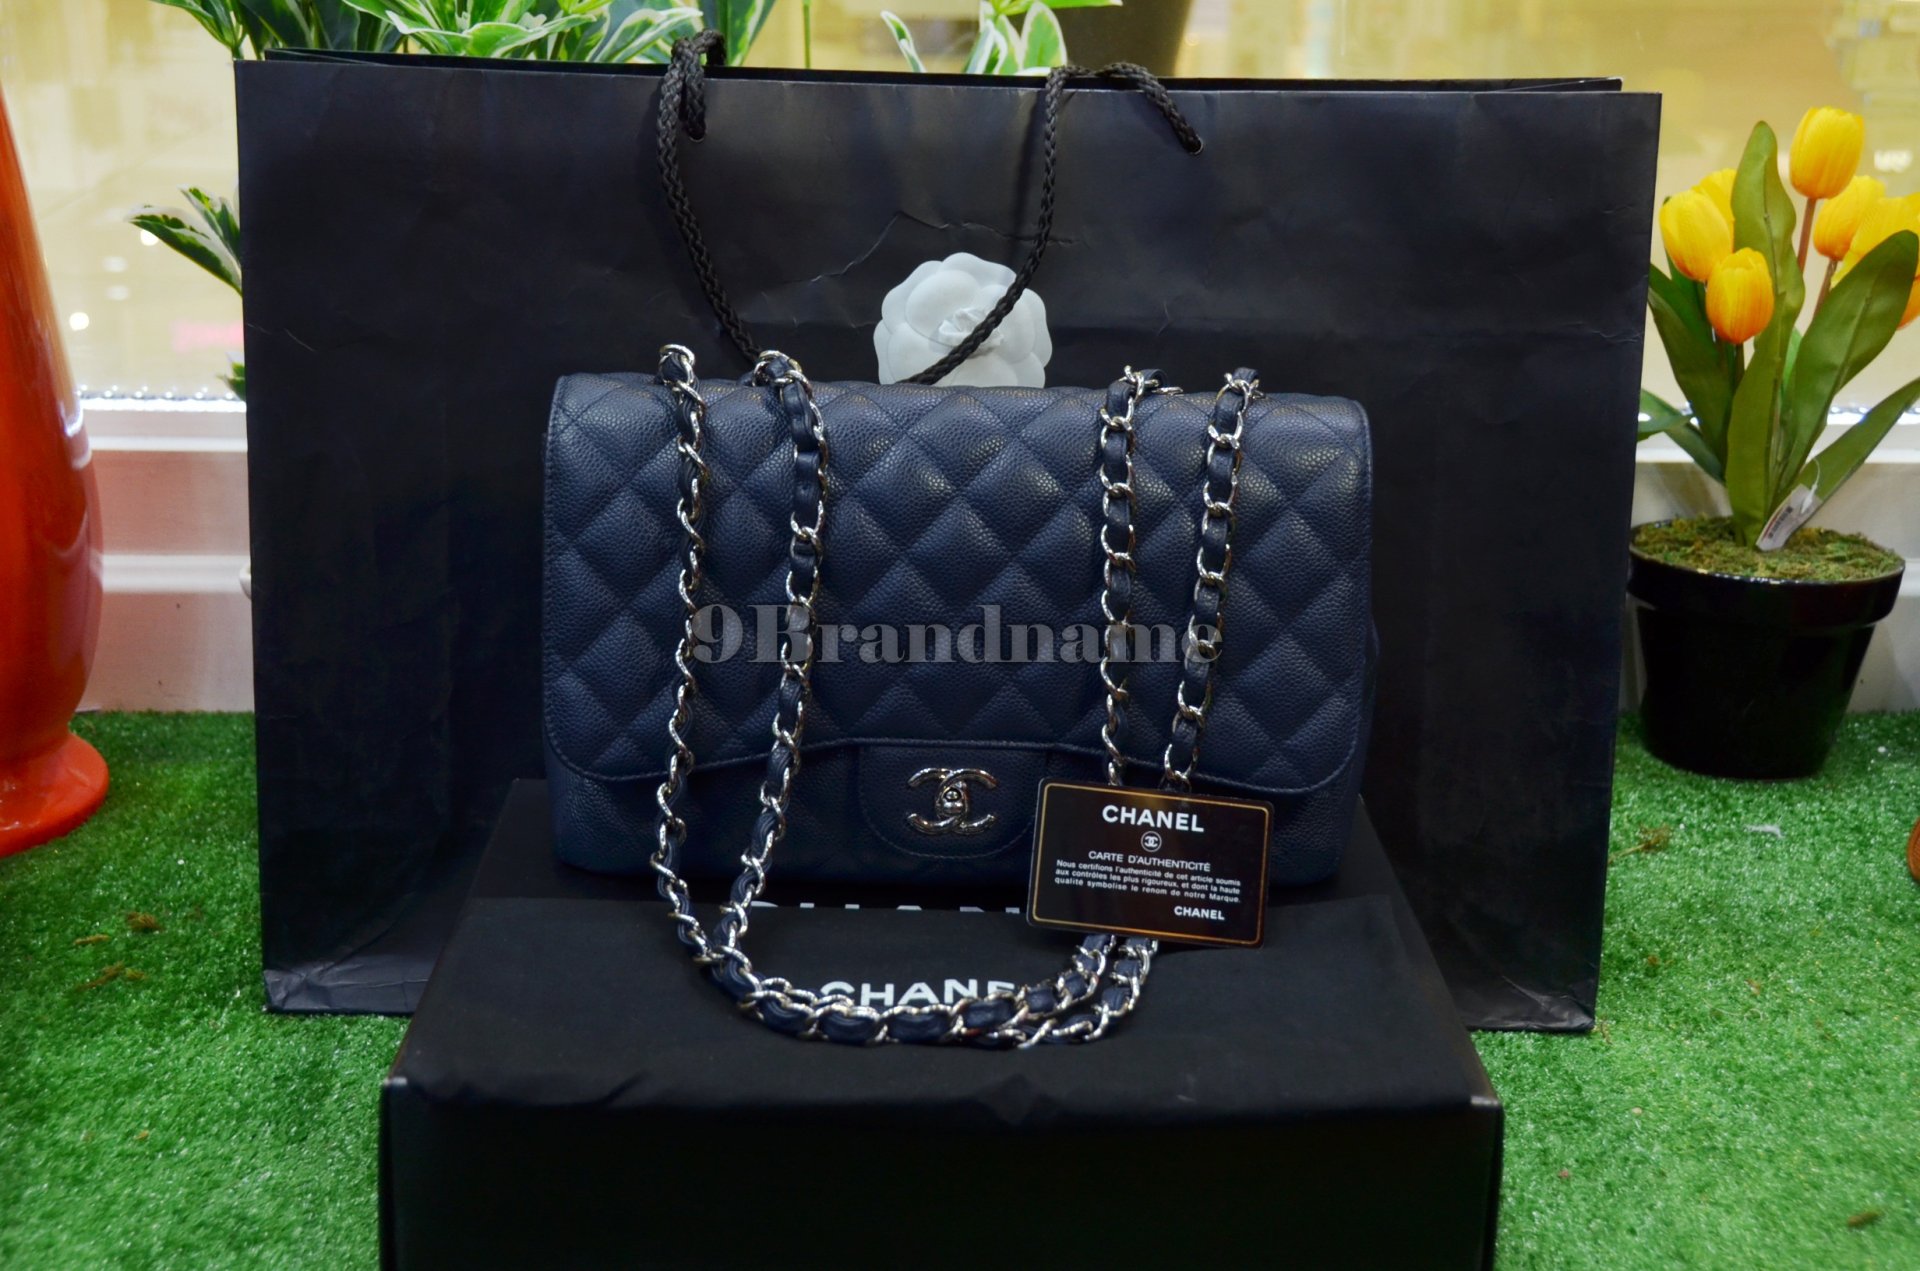 Chanel Jumbo Navy Blue Cavier 12 SHW - Used Authentic Bag - 9brandname